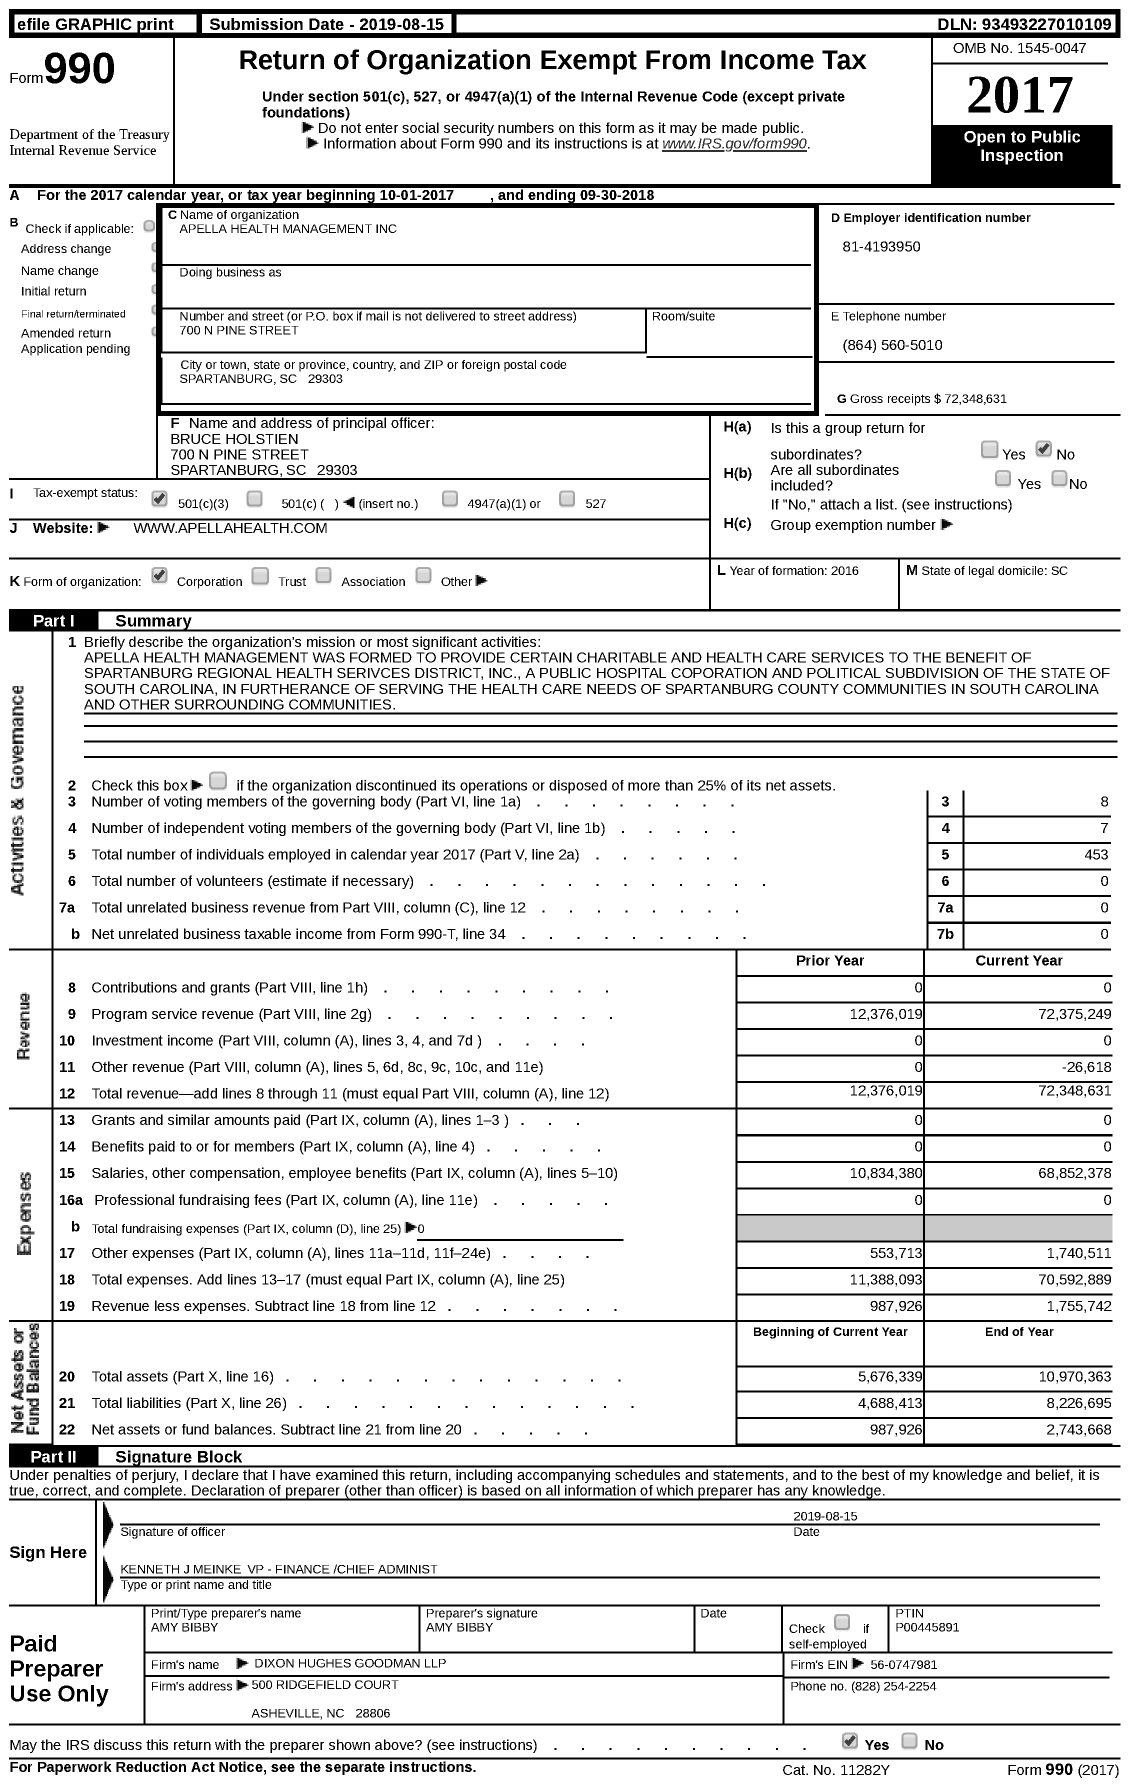 Image of first page of 2017 Form 990 for Apella Health Management